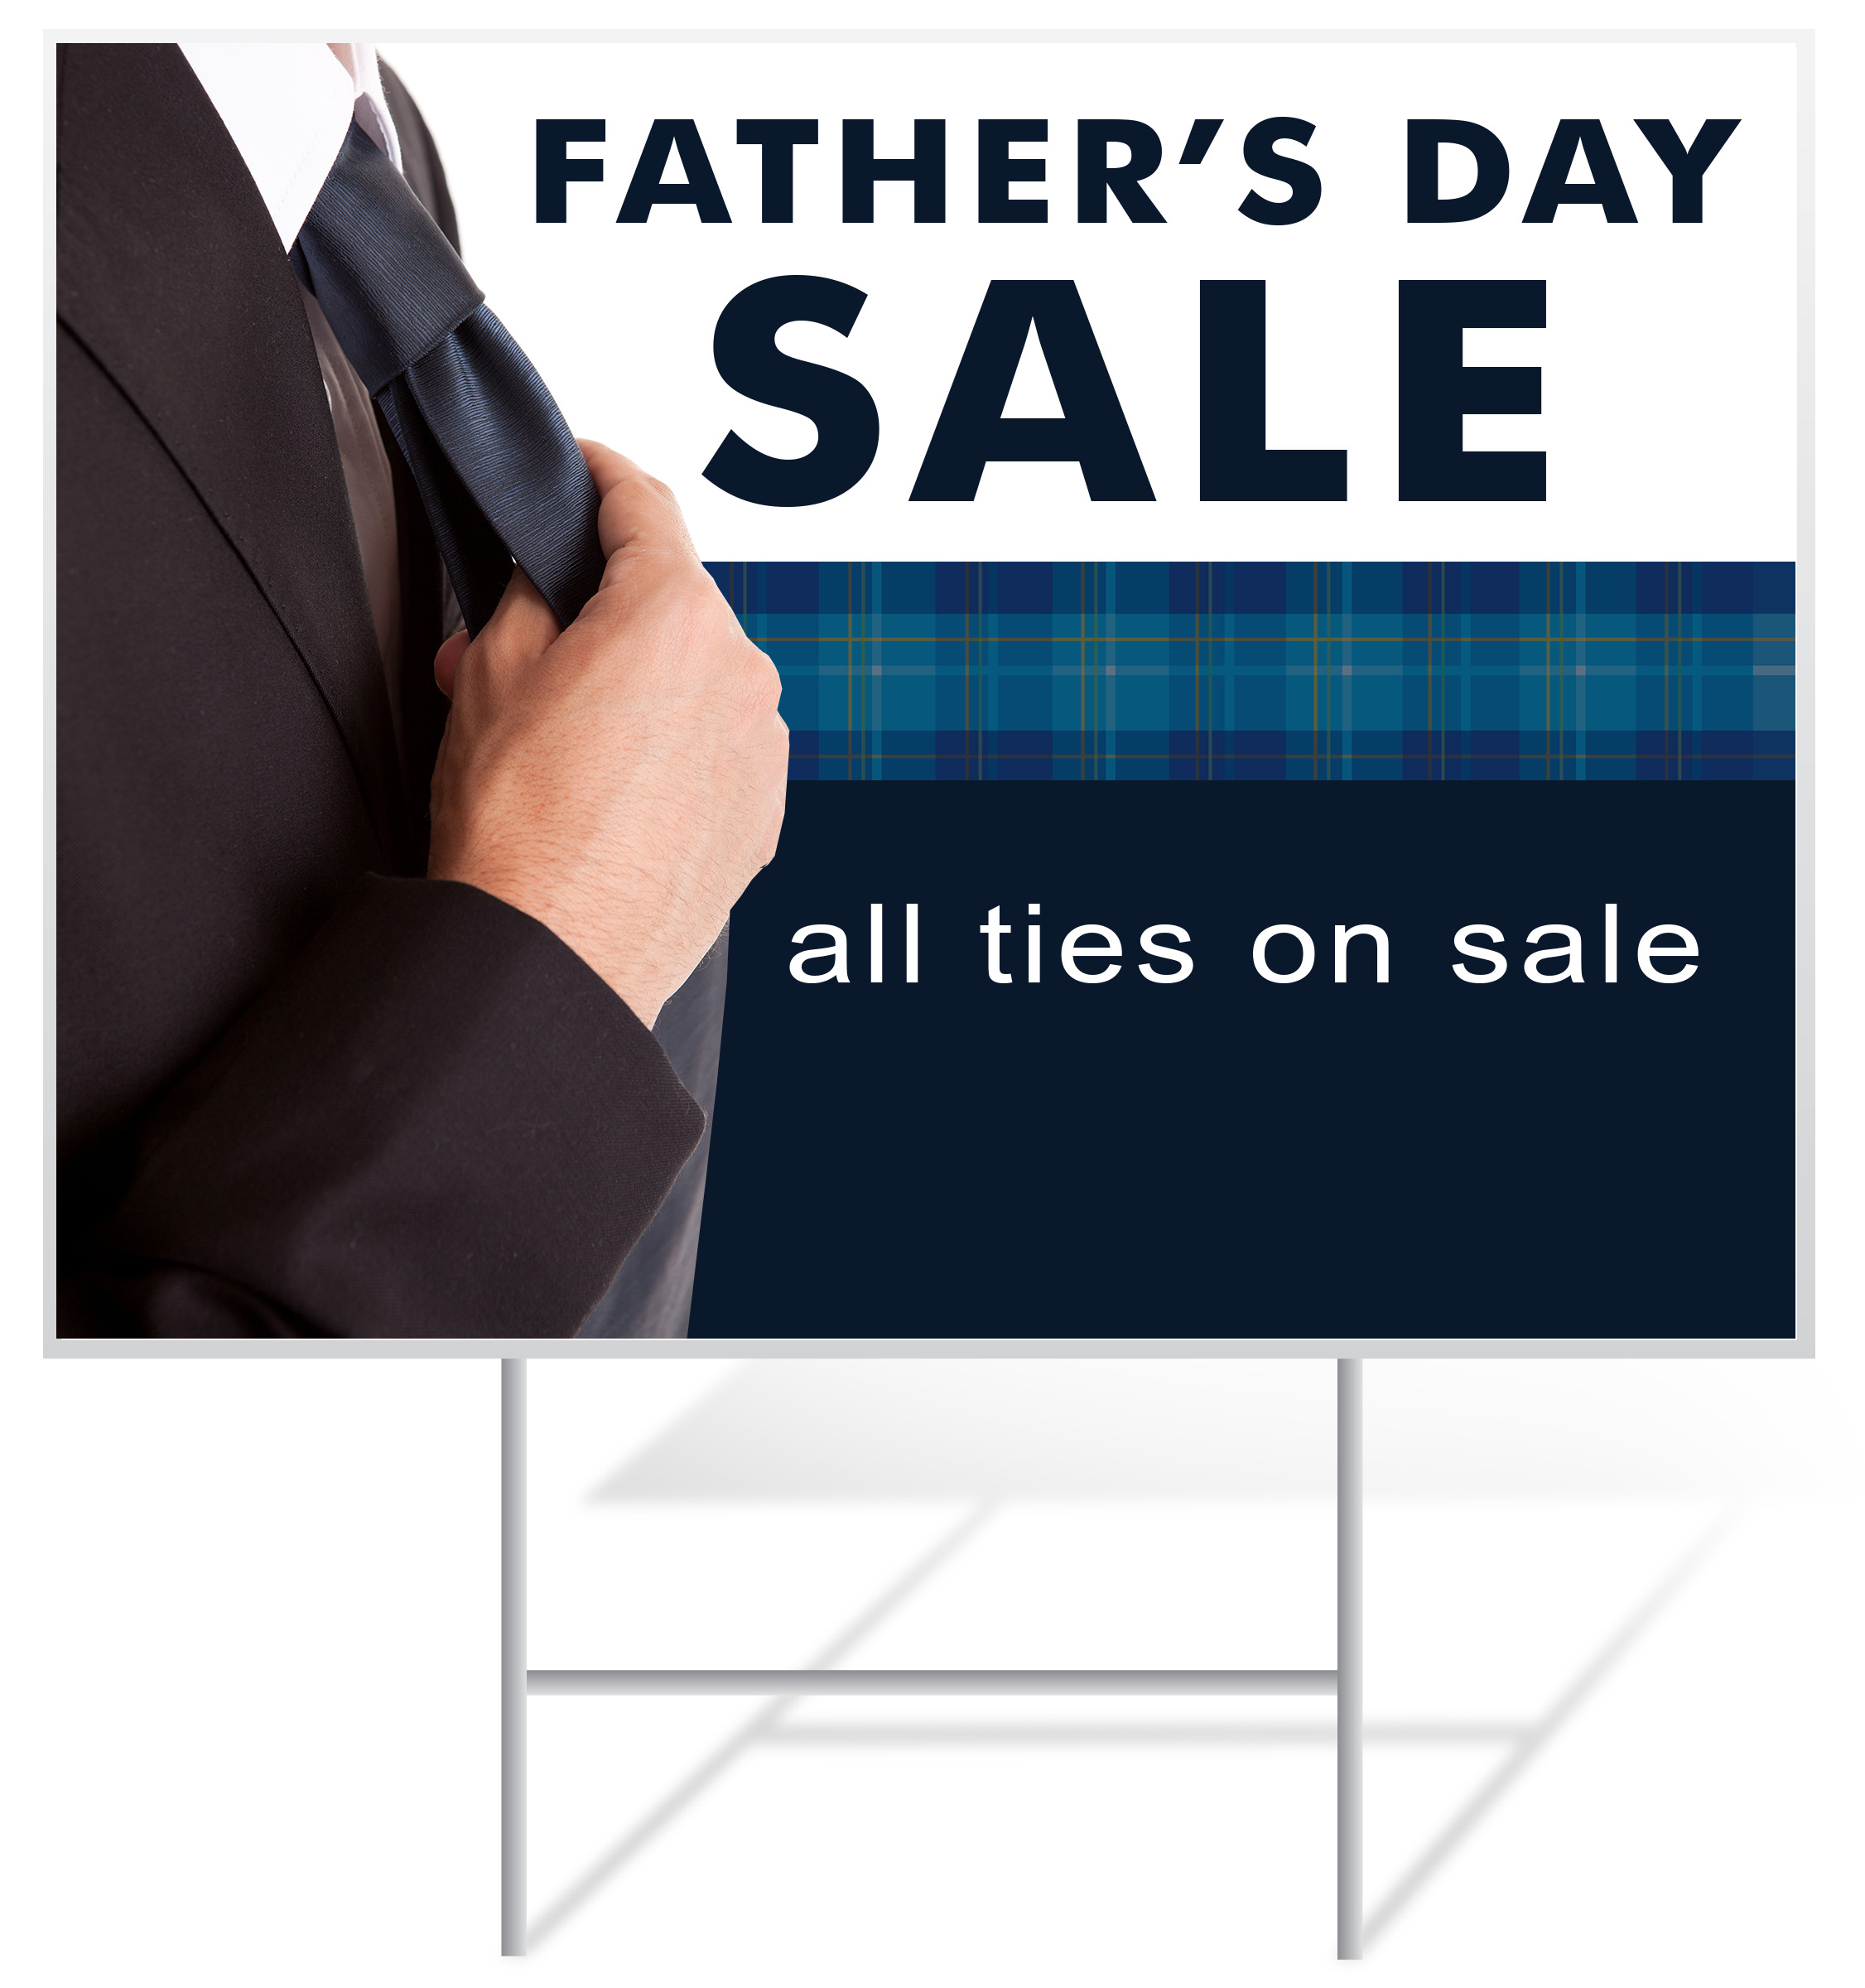 Father's Day Lawn Sign Example | LawnSigns.com